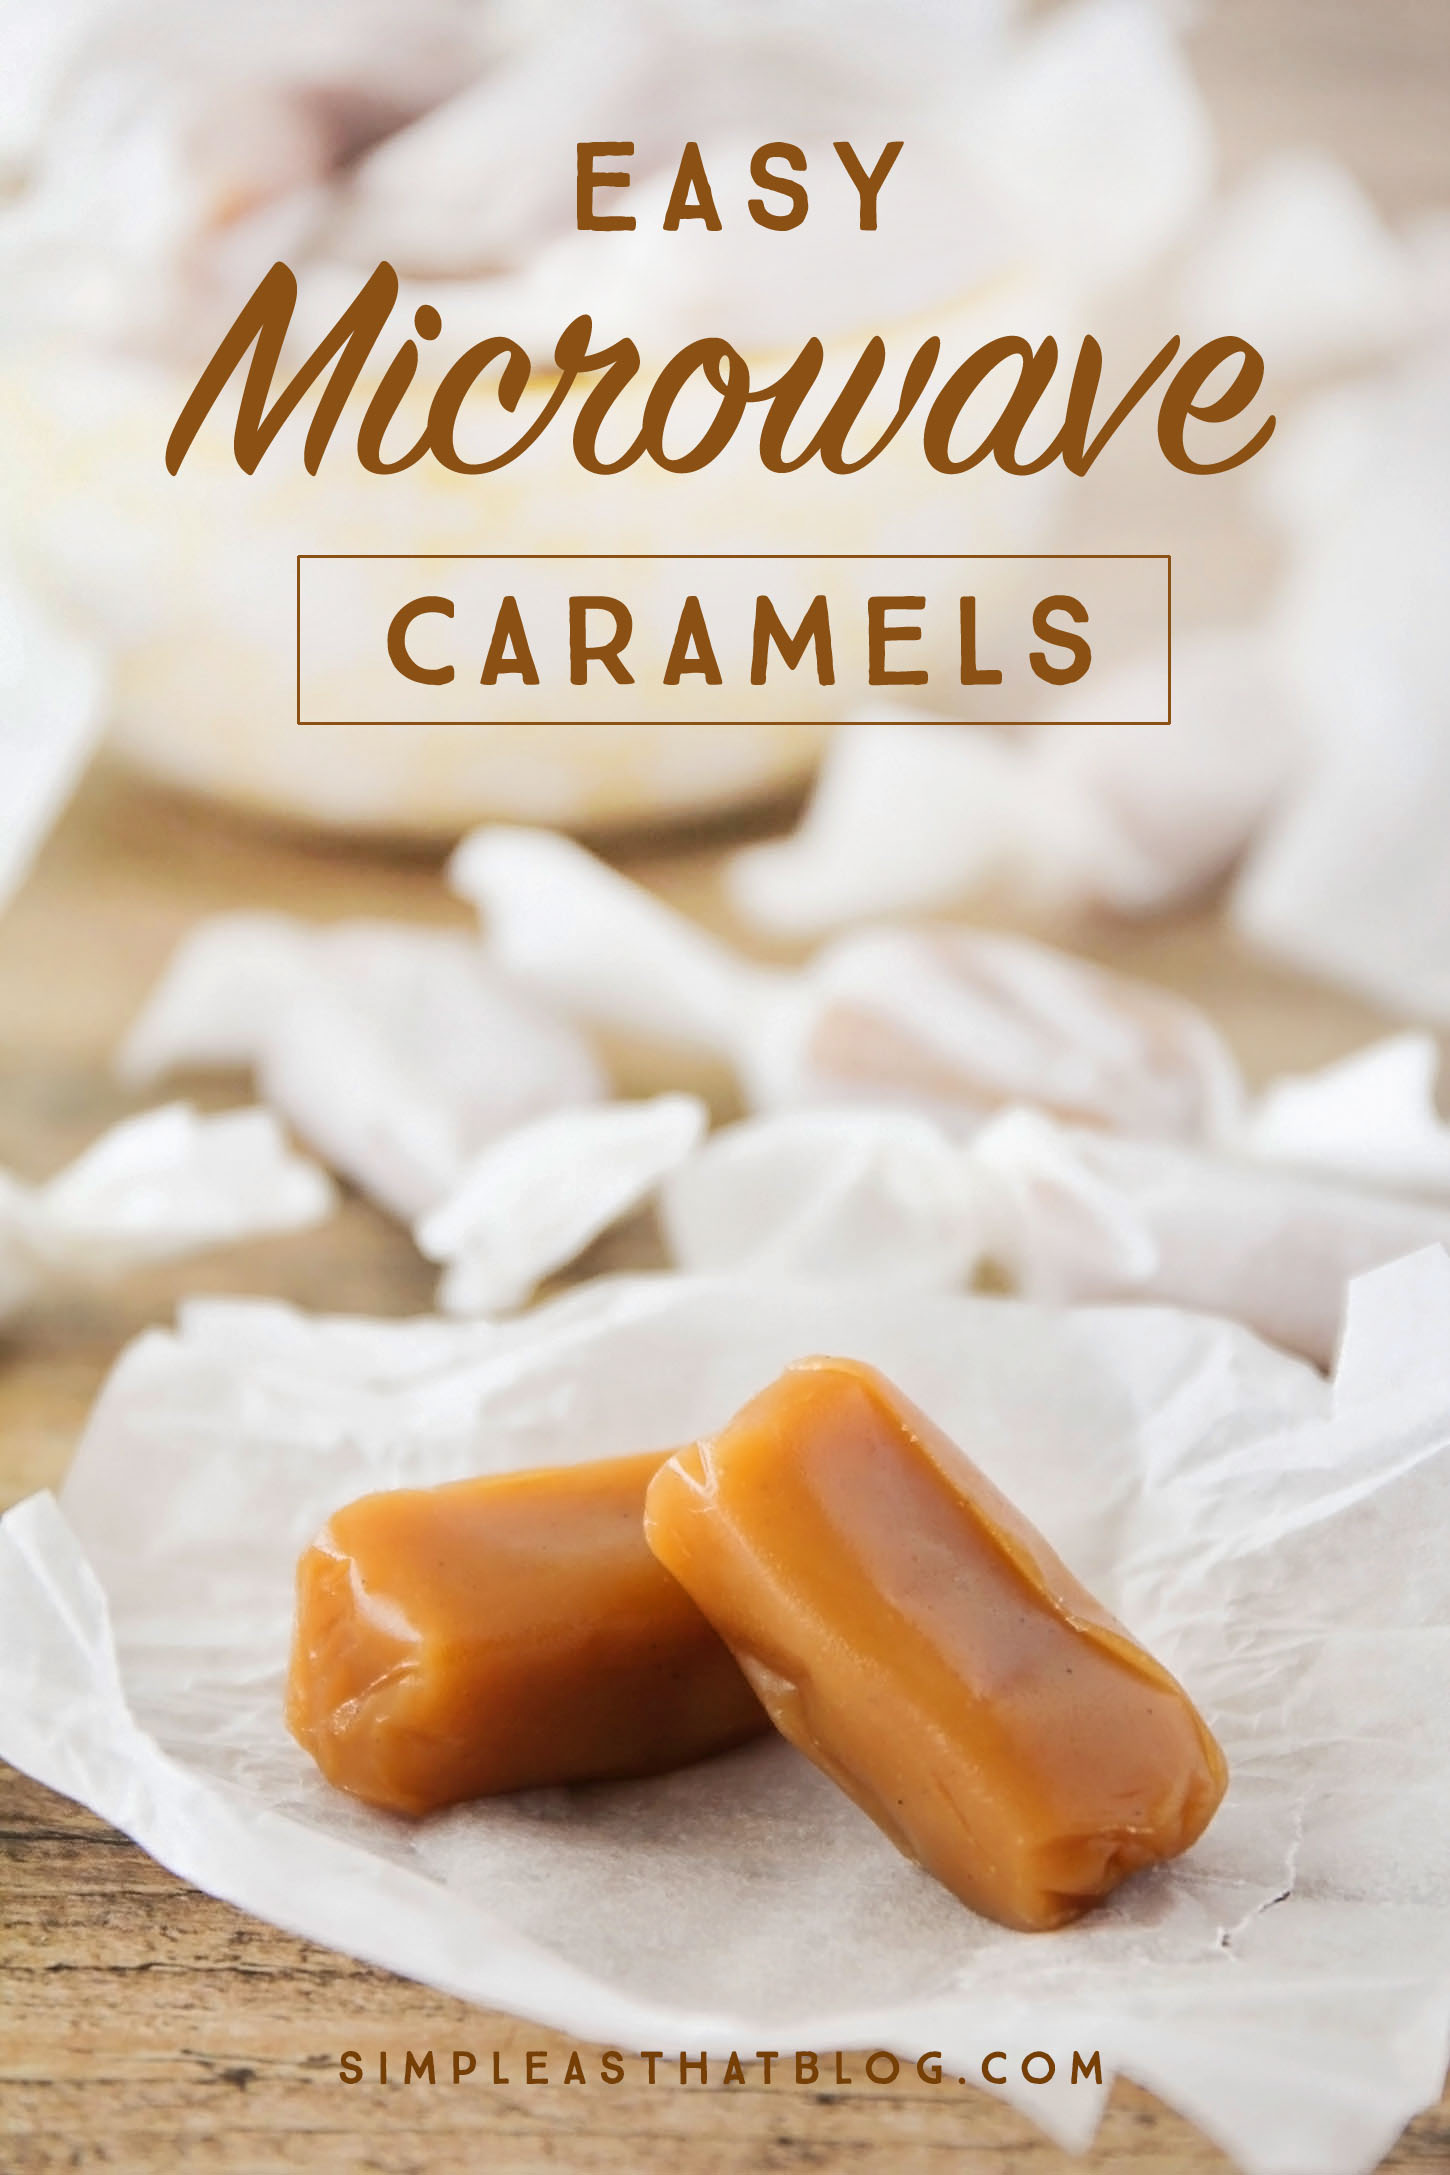 This is the easiest homemade candy you'll ever make! They only take a few minutes in the microwave and they turn out perfectly delicious every time!